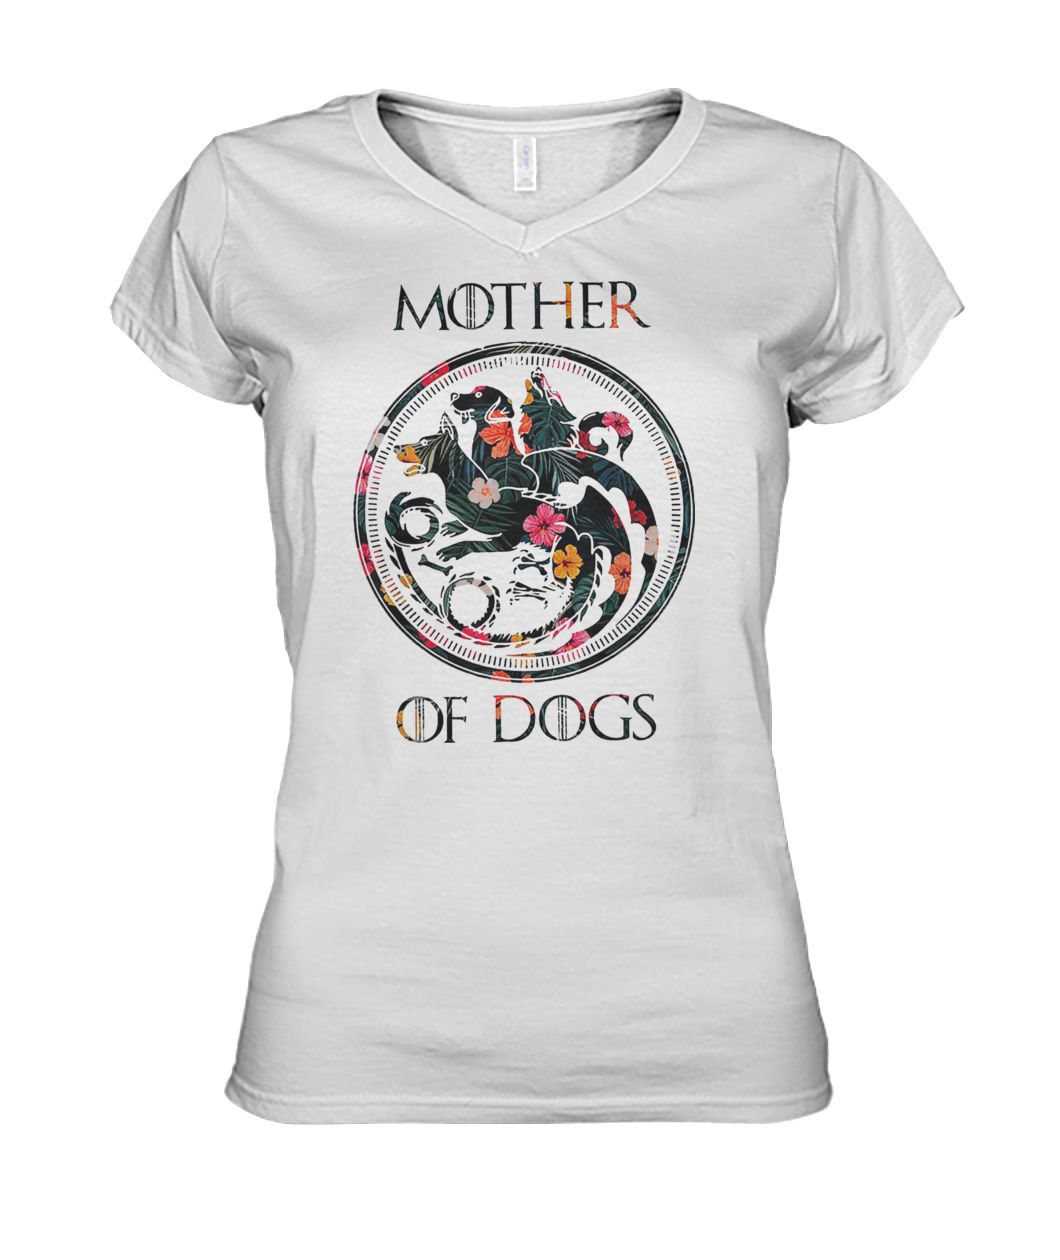 Floral flower game of thrones mother of dogs women's v-neck